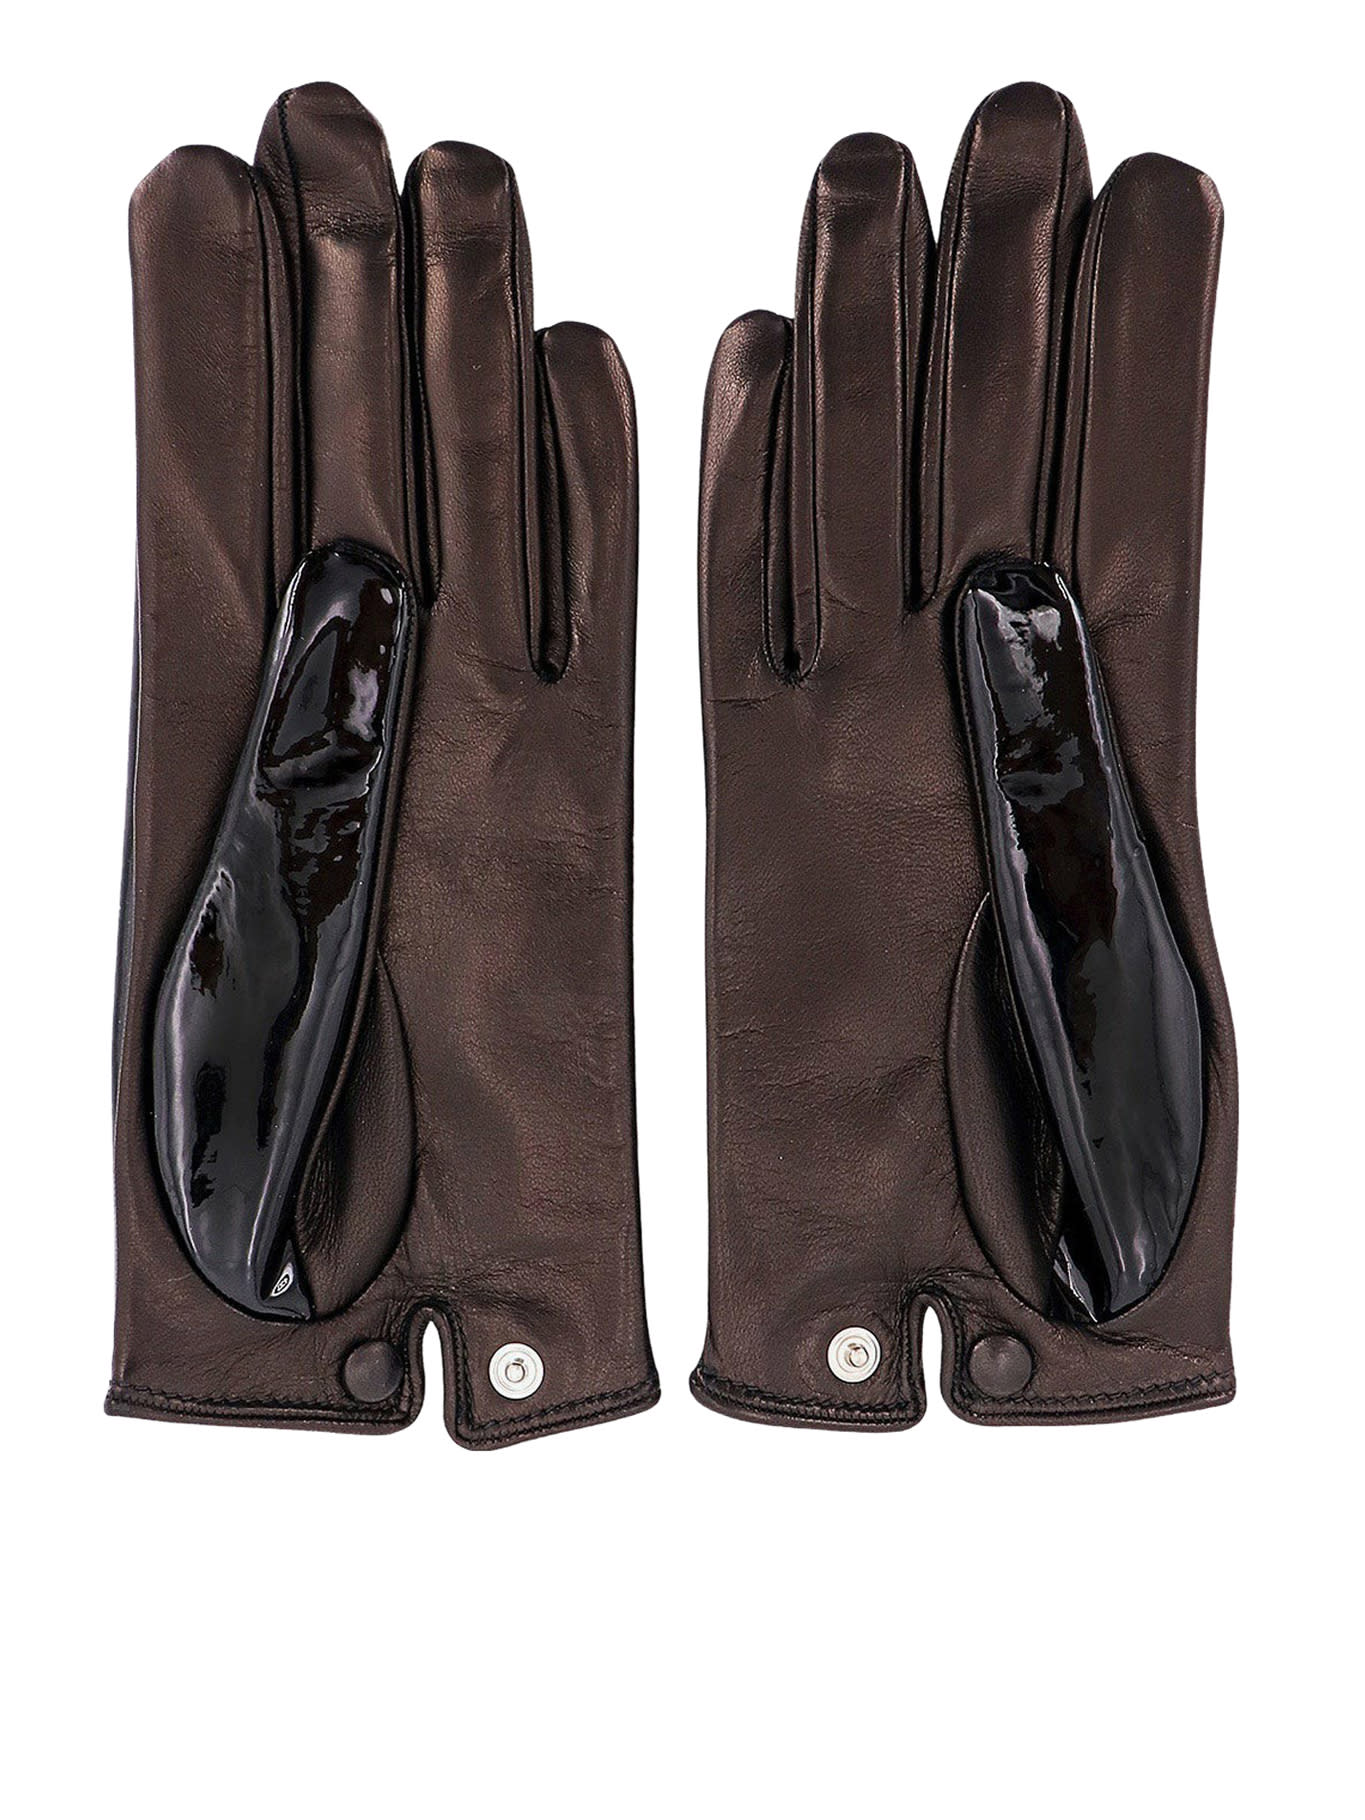 Shop Durazzi Milano Patent And Calfskin Leather Gloves. Silk Lining In Black